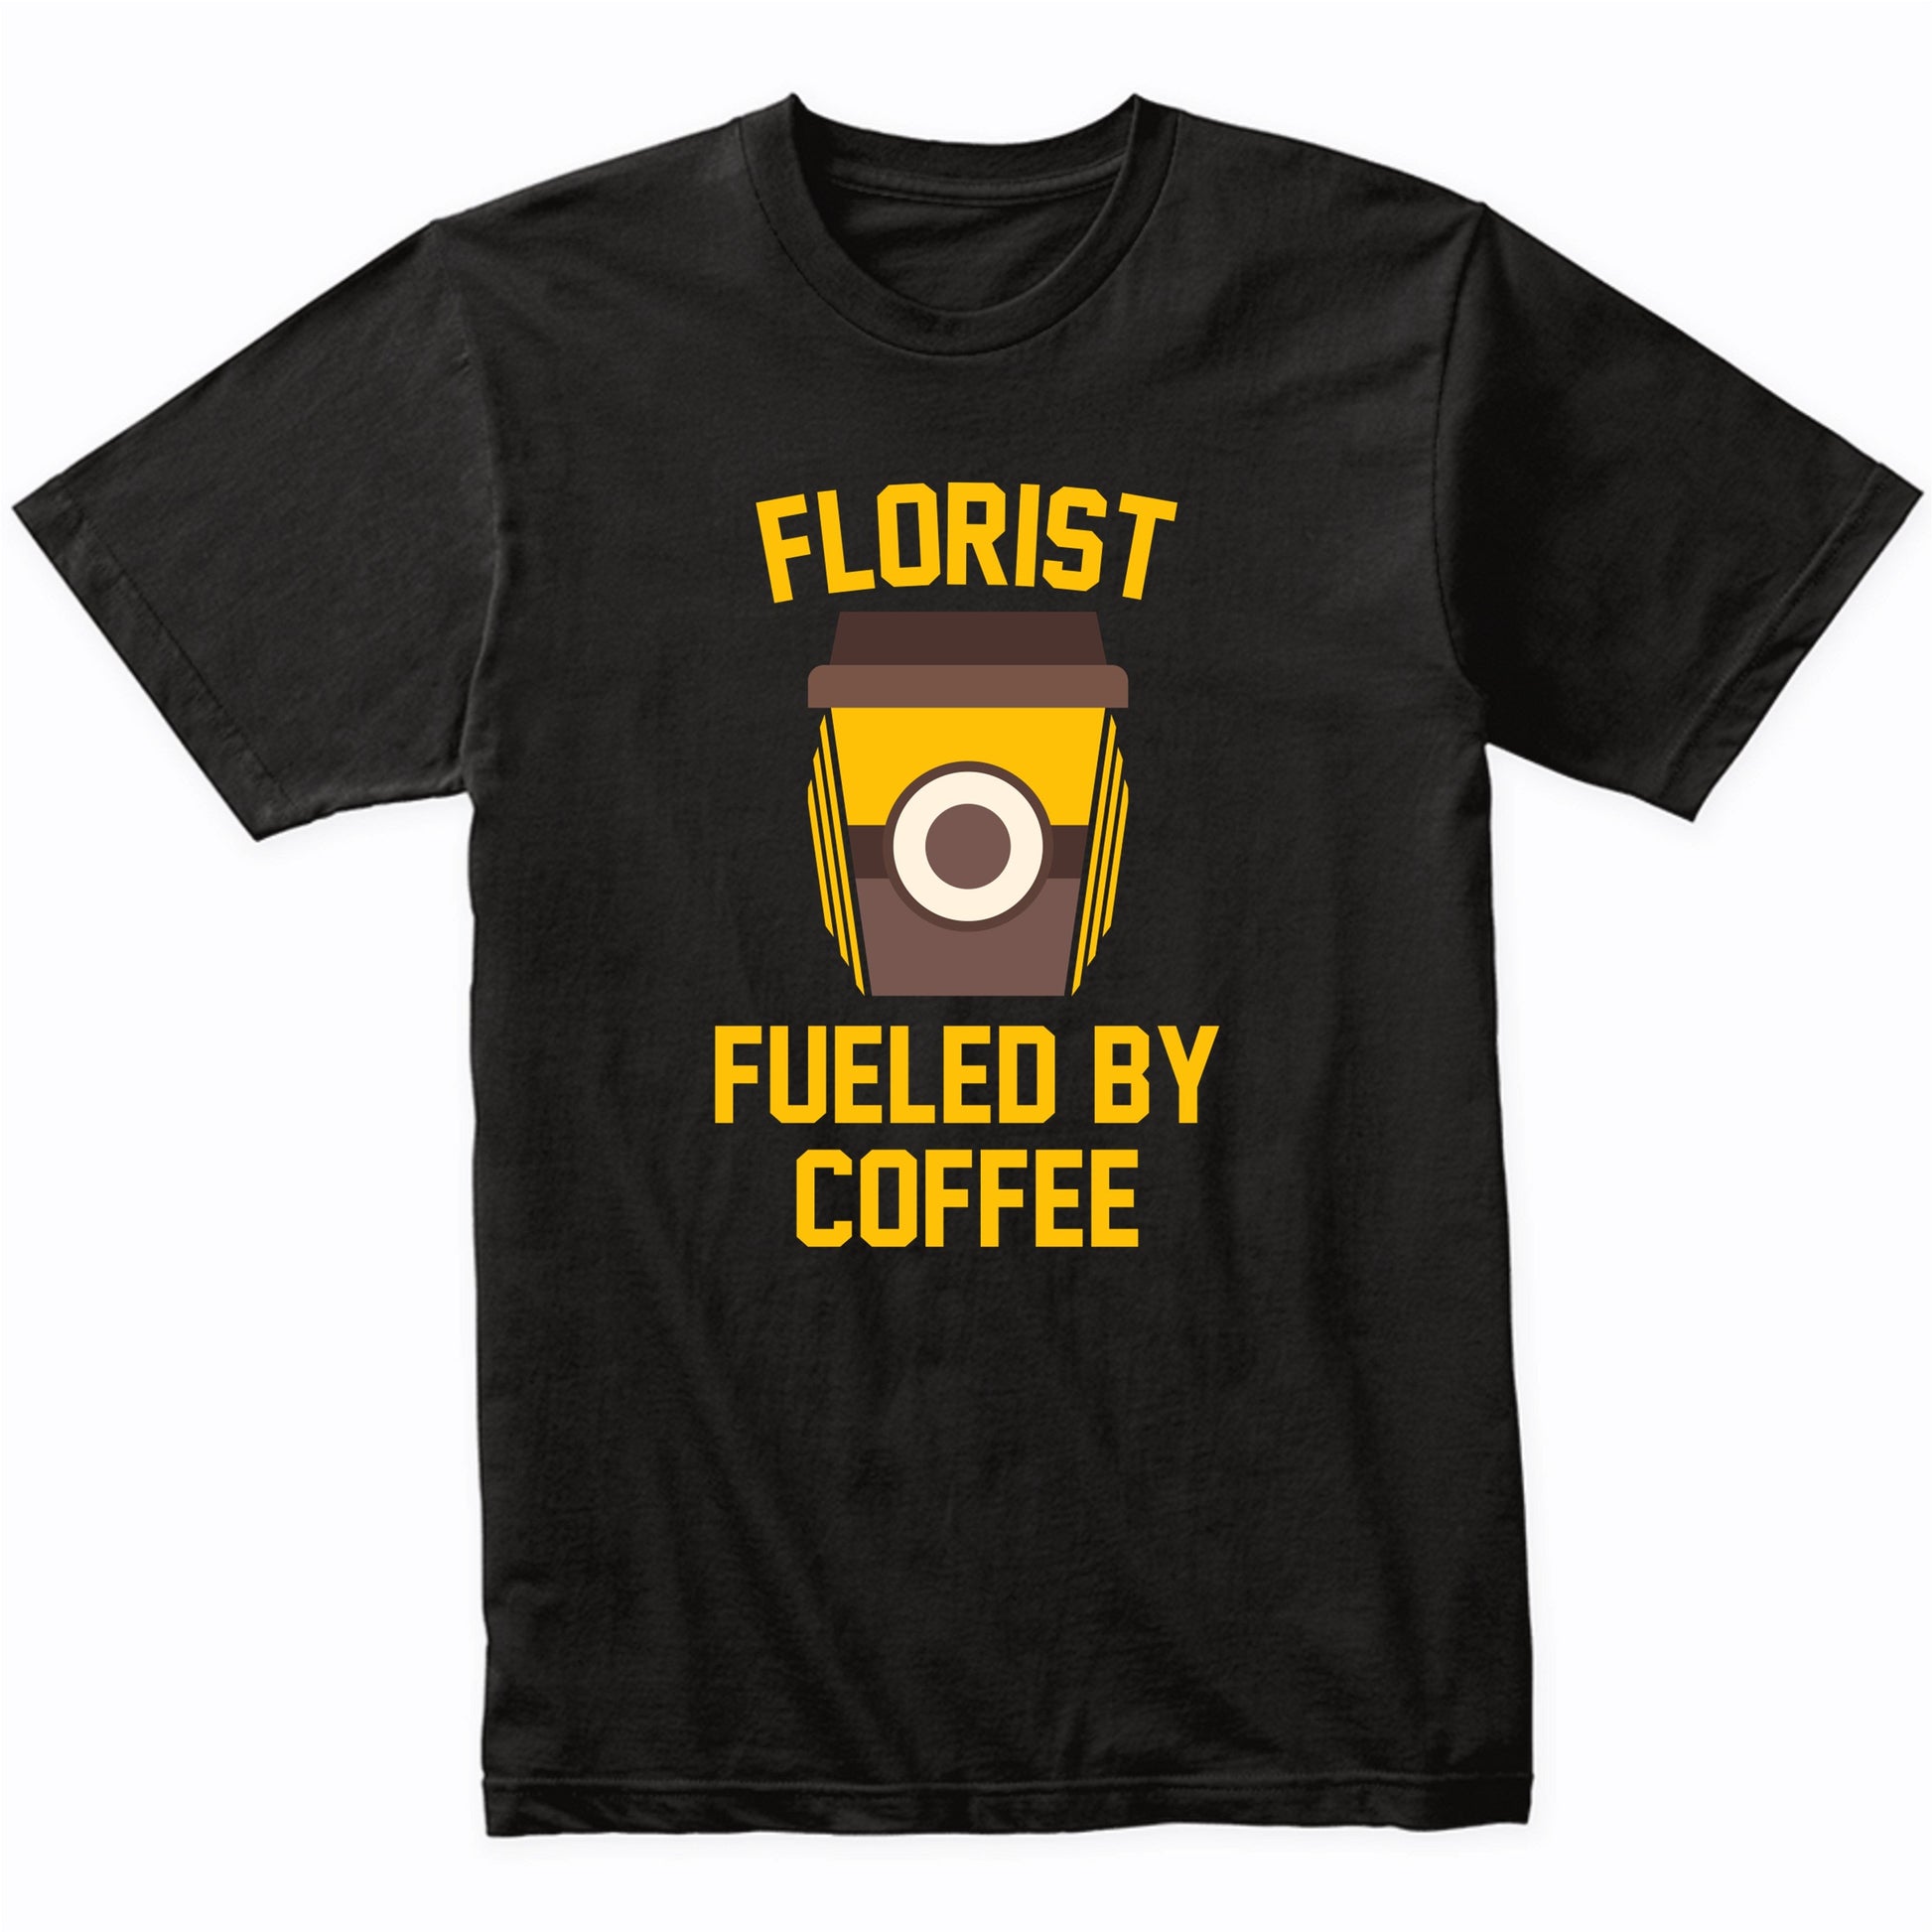 Florist Fueled By Coffee Funny Shirt